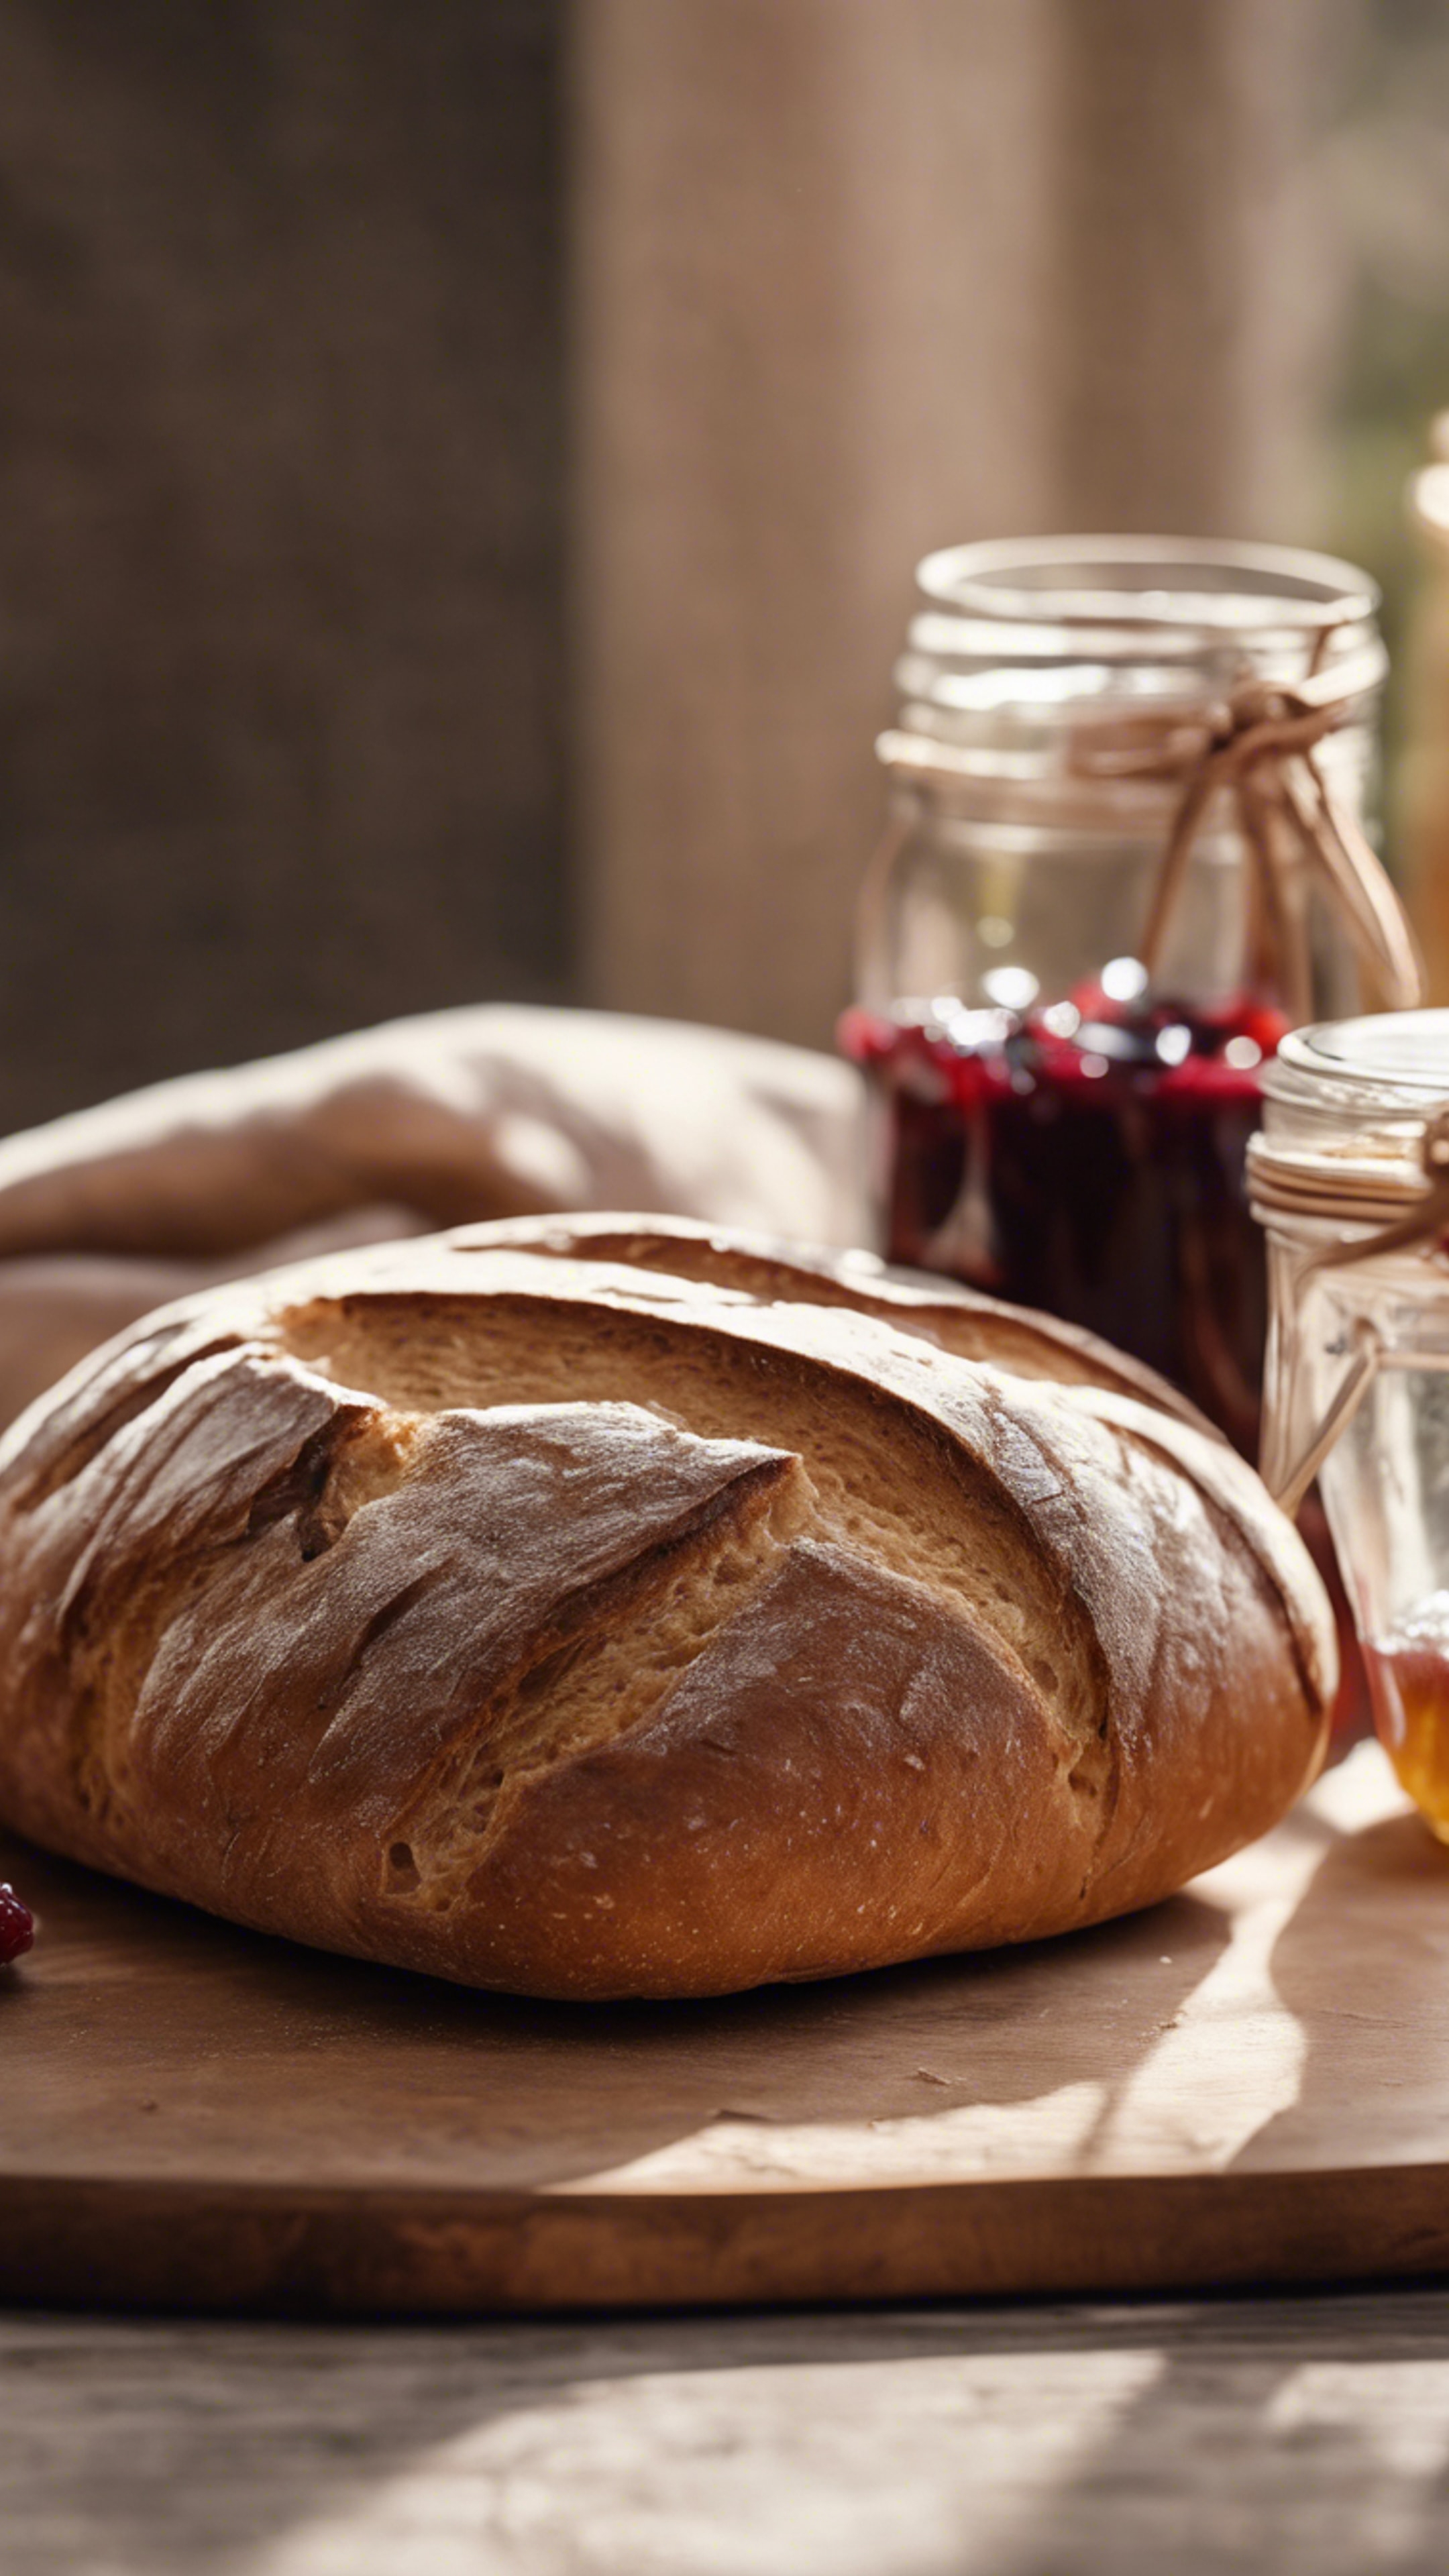 A close-up of a freshly baked bread sitting on a wooden cutting board, next to a jar of homemade jam.壁紙[9ebf491f88854369a221]